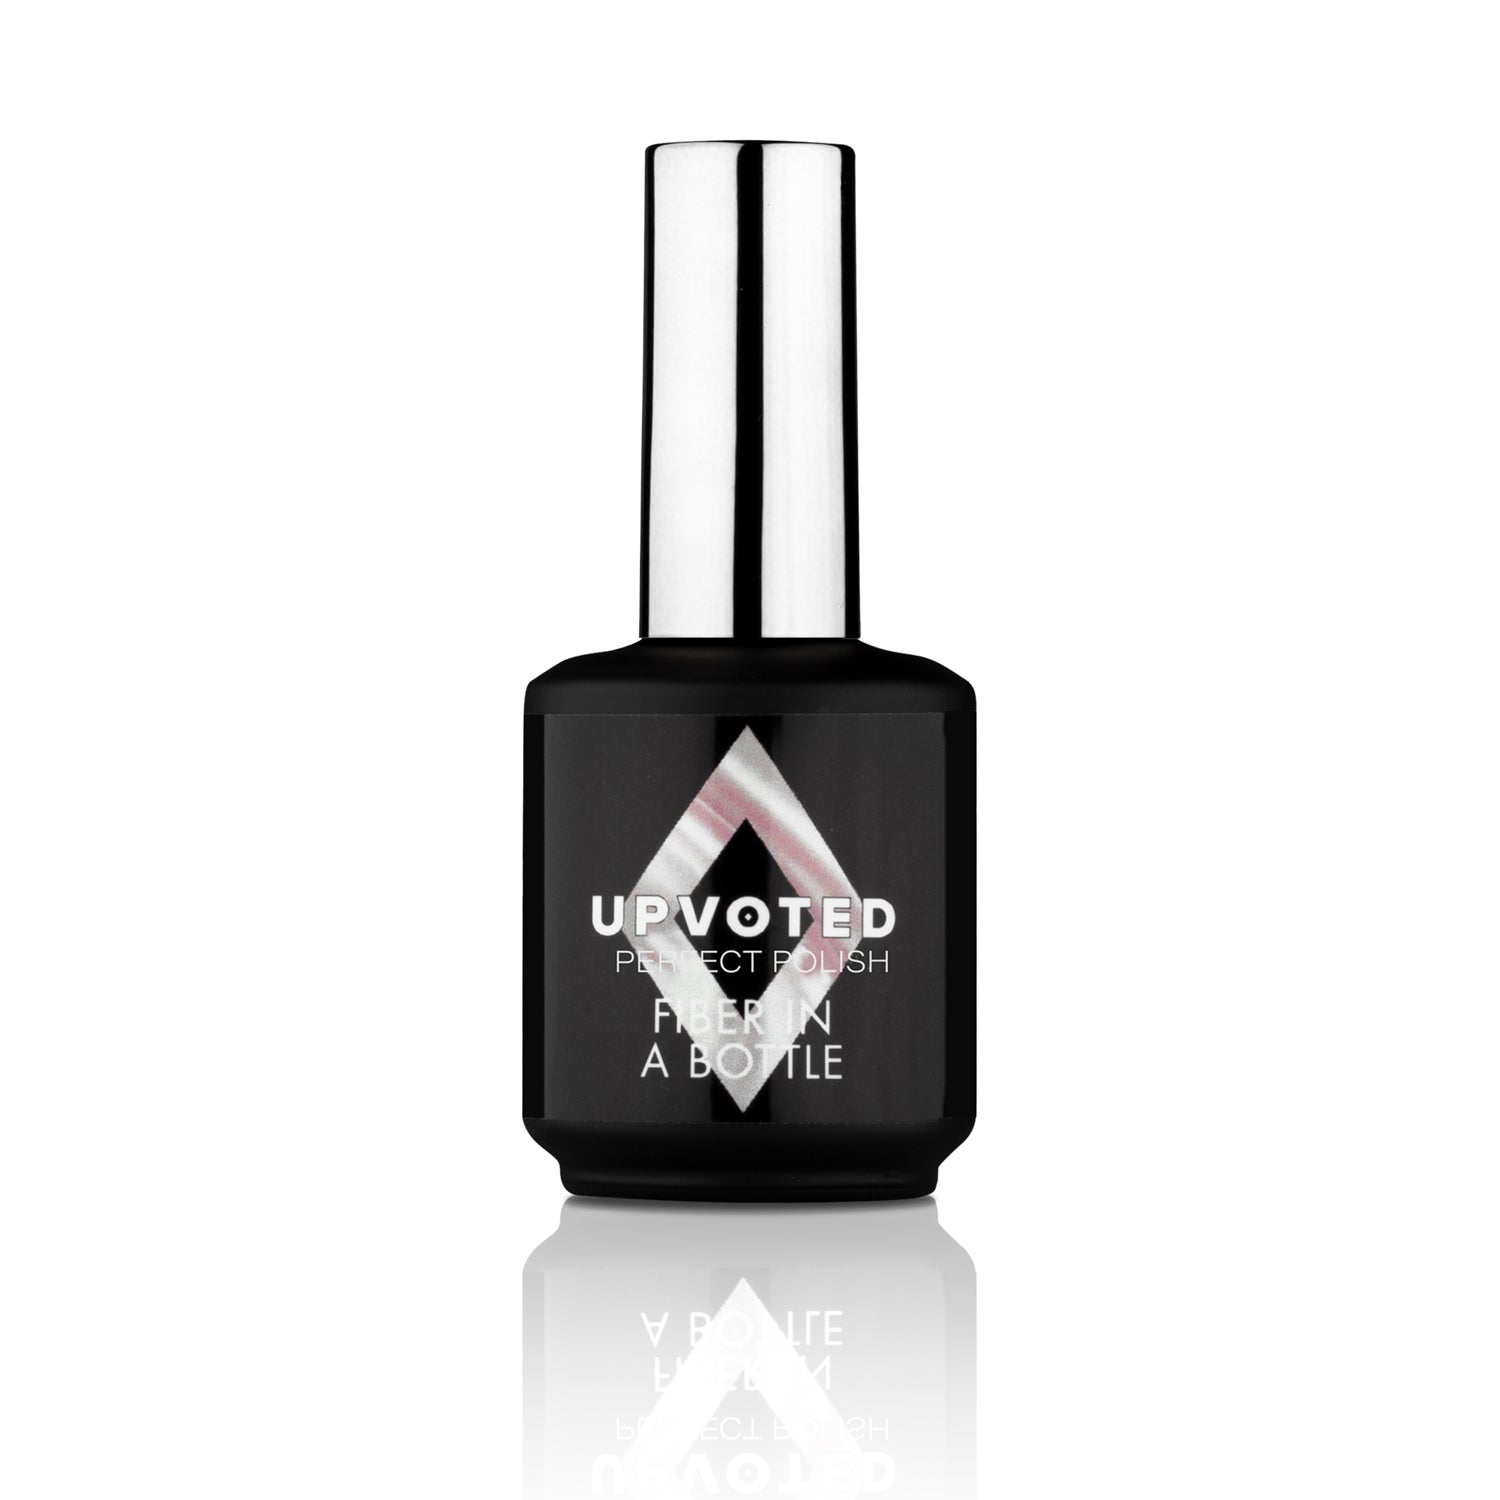 Nail Perfect Upvoted Fiber in a Bottle Satin Pink